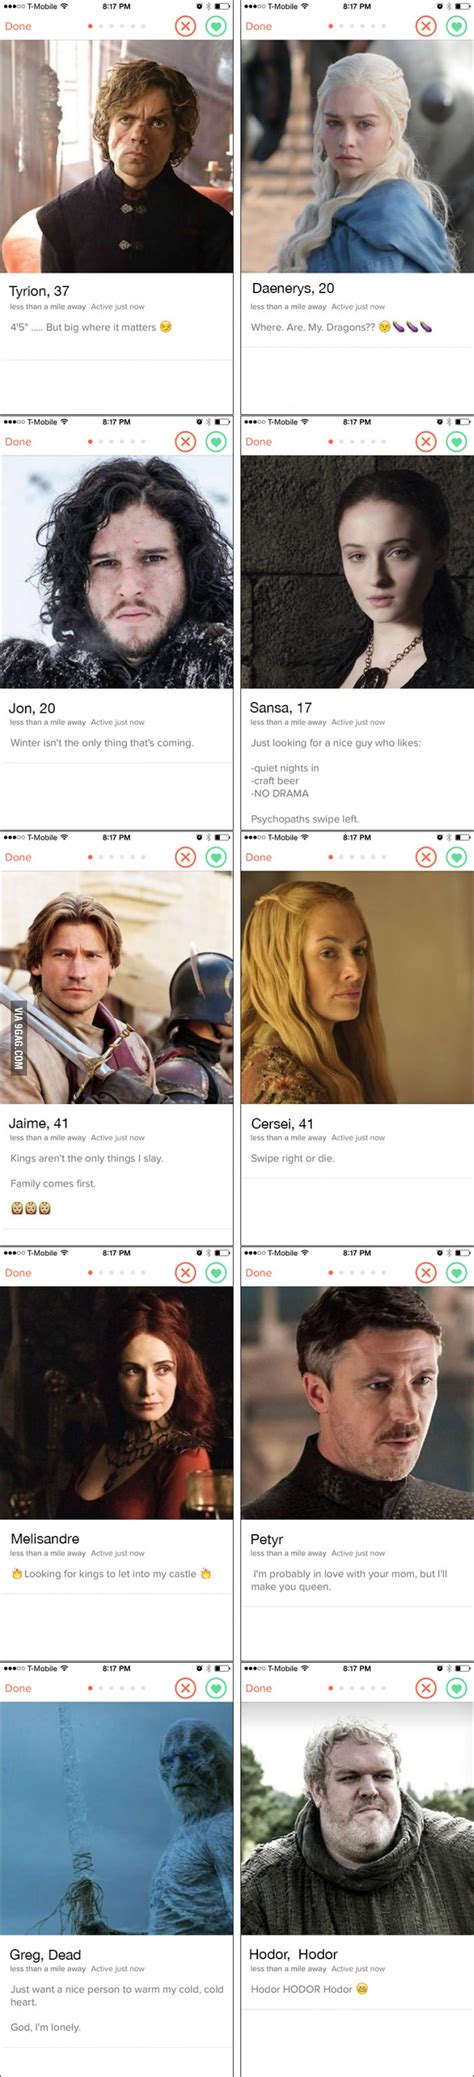 10 profiles for game of thrones characters if they had dating app gaming got characters